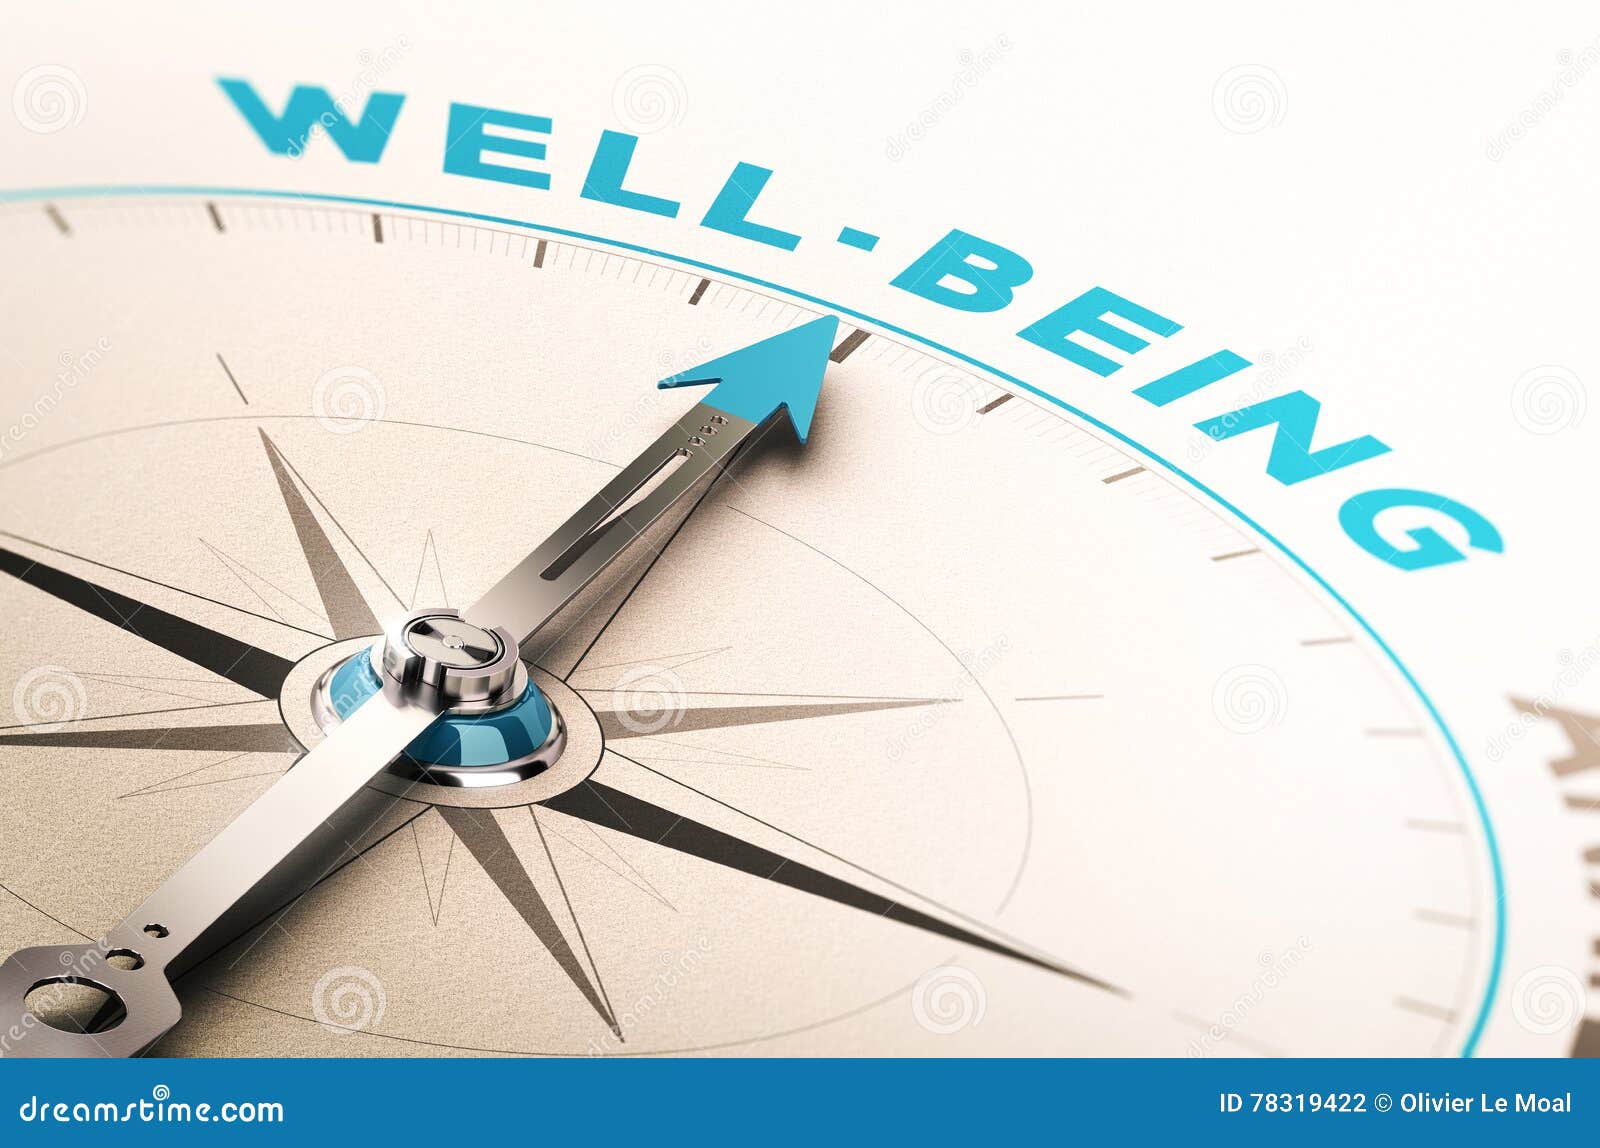 well-being or wellness